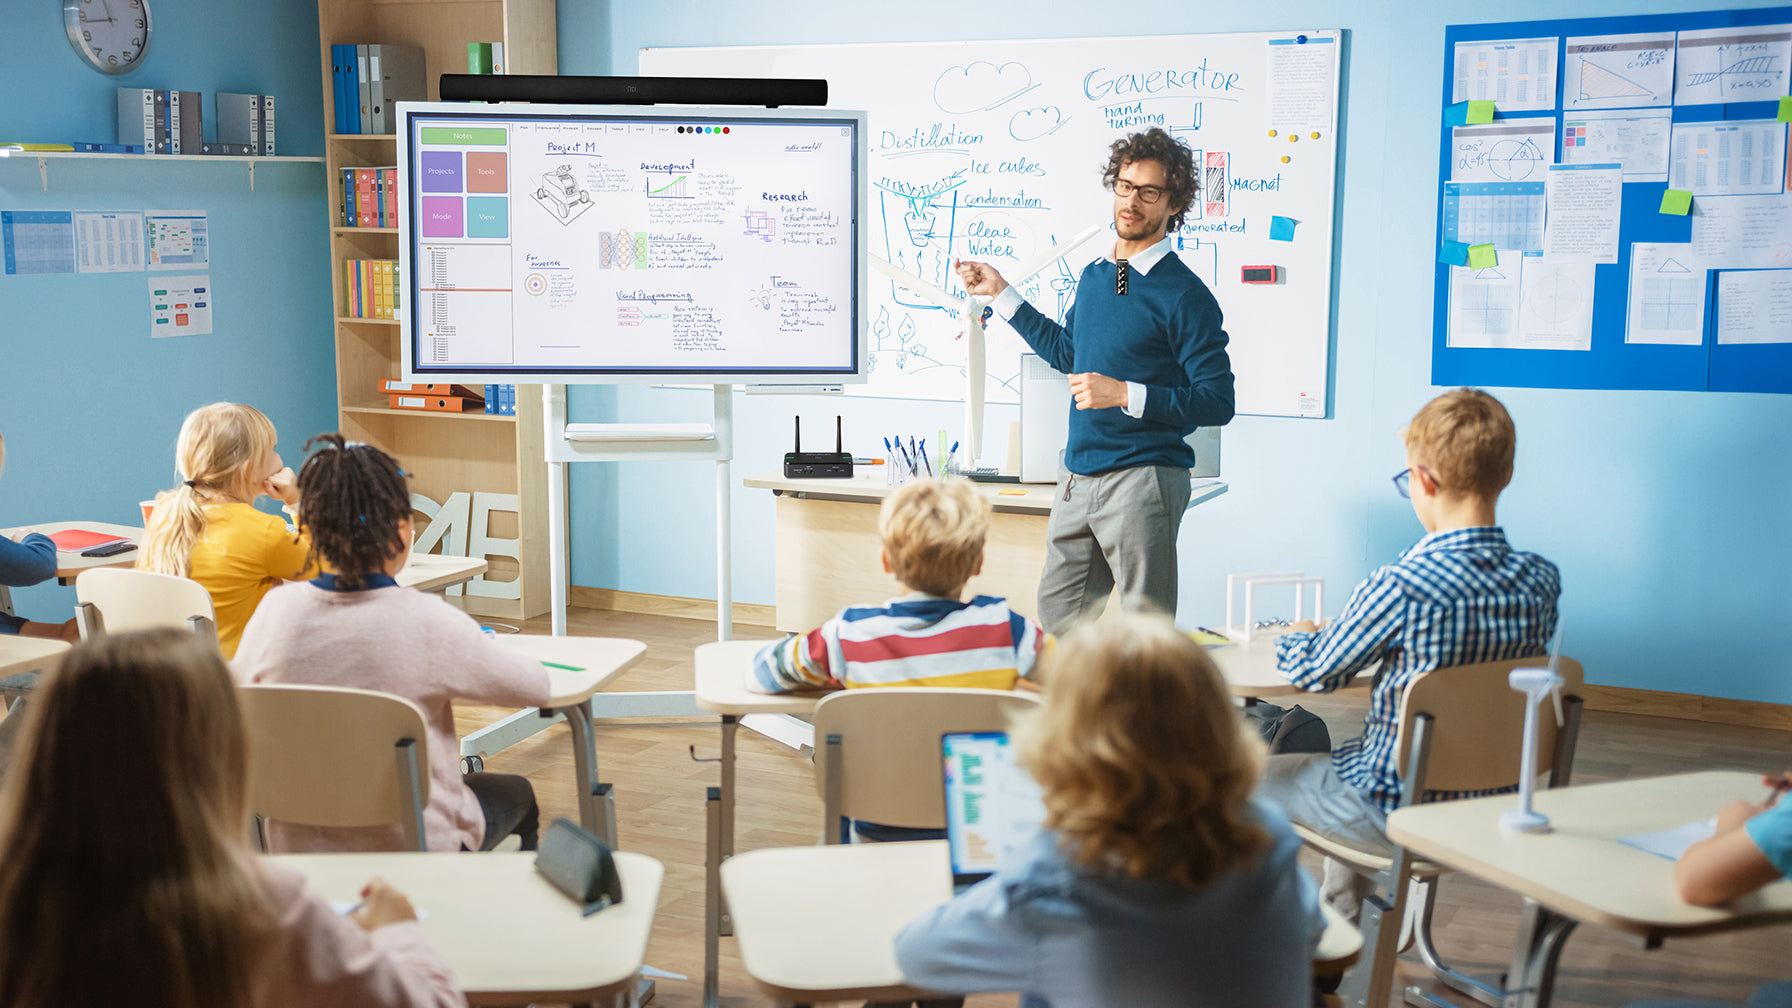 Use the soundbar with wireless microphones in the classroom for clear and easy hearing